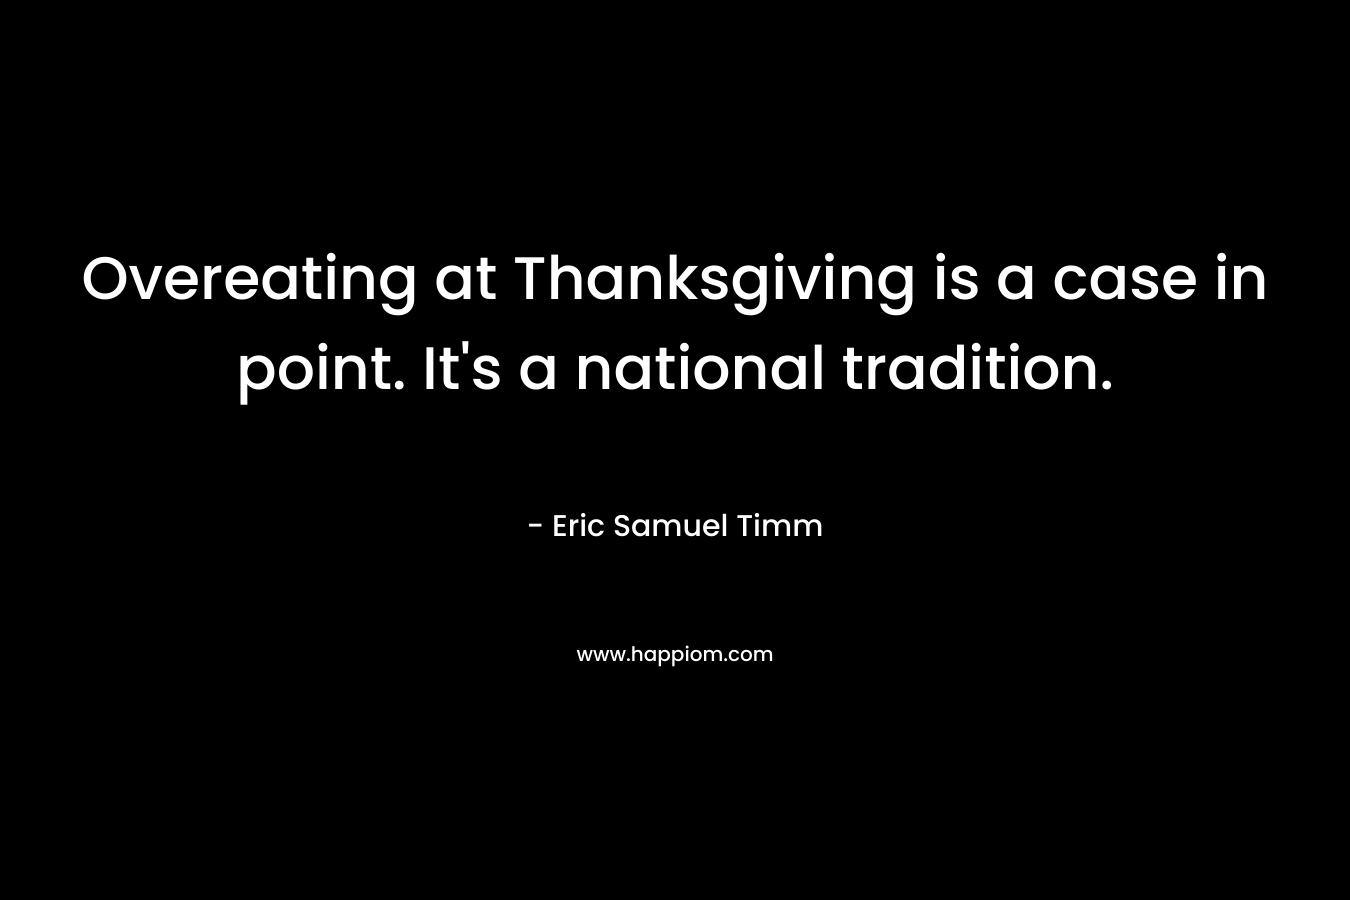 Overeating at Thanksgiving is a case in point. It’s a national tradition. – Eric Samuel Timm